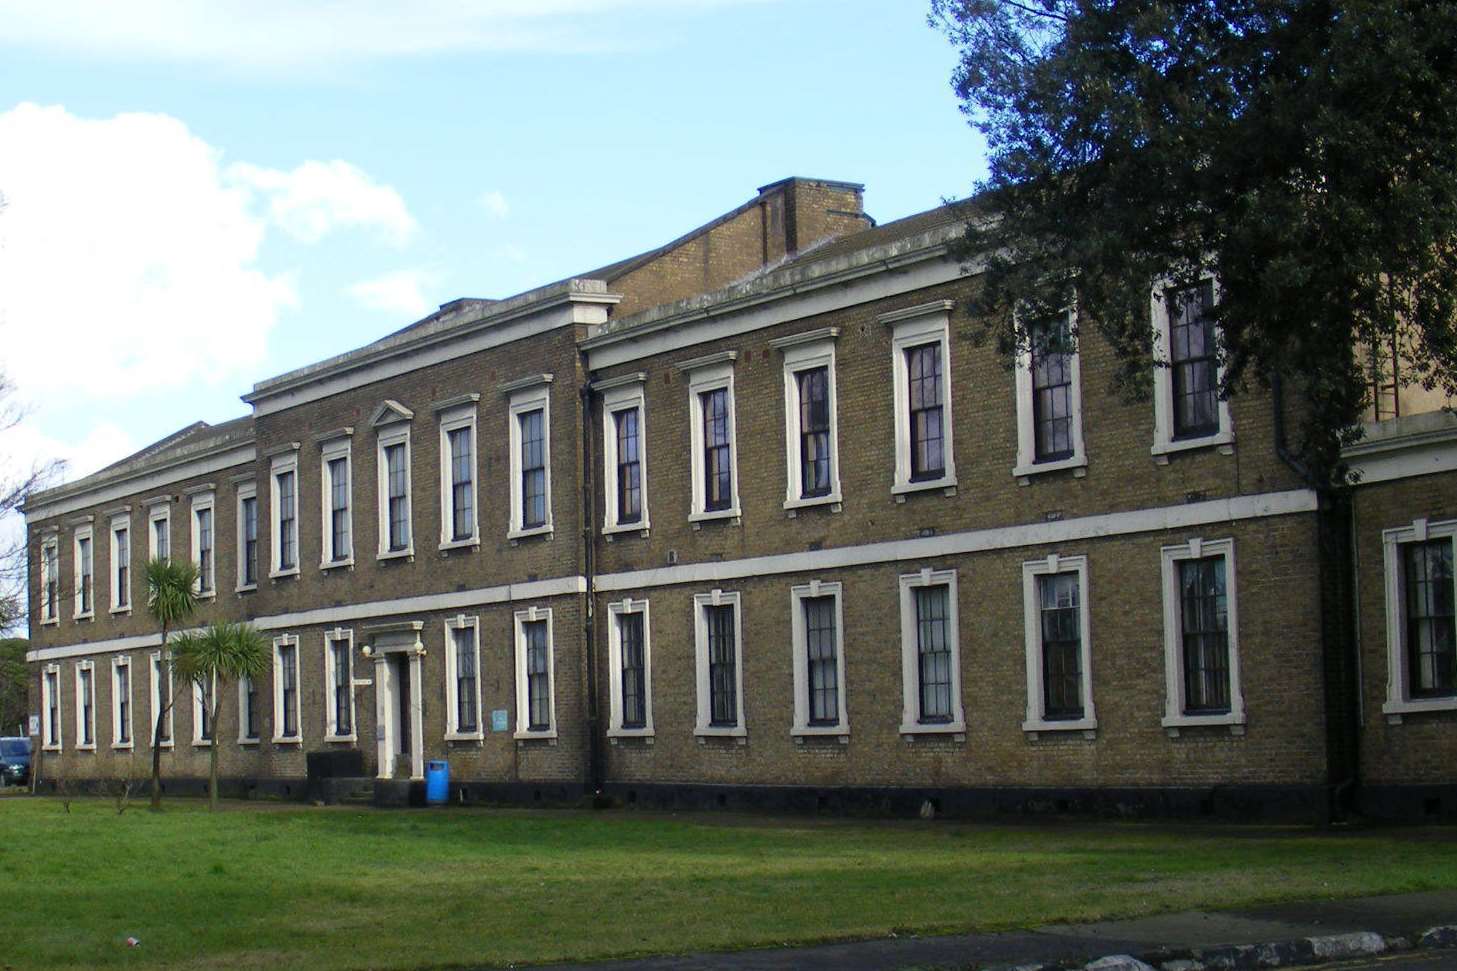 The former Sheerness military hospital. Could it become a grammar school?